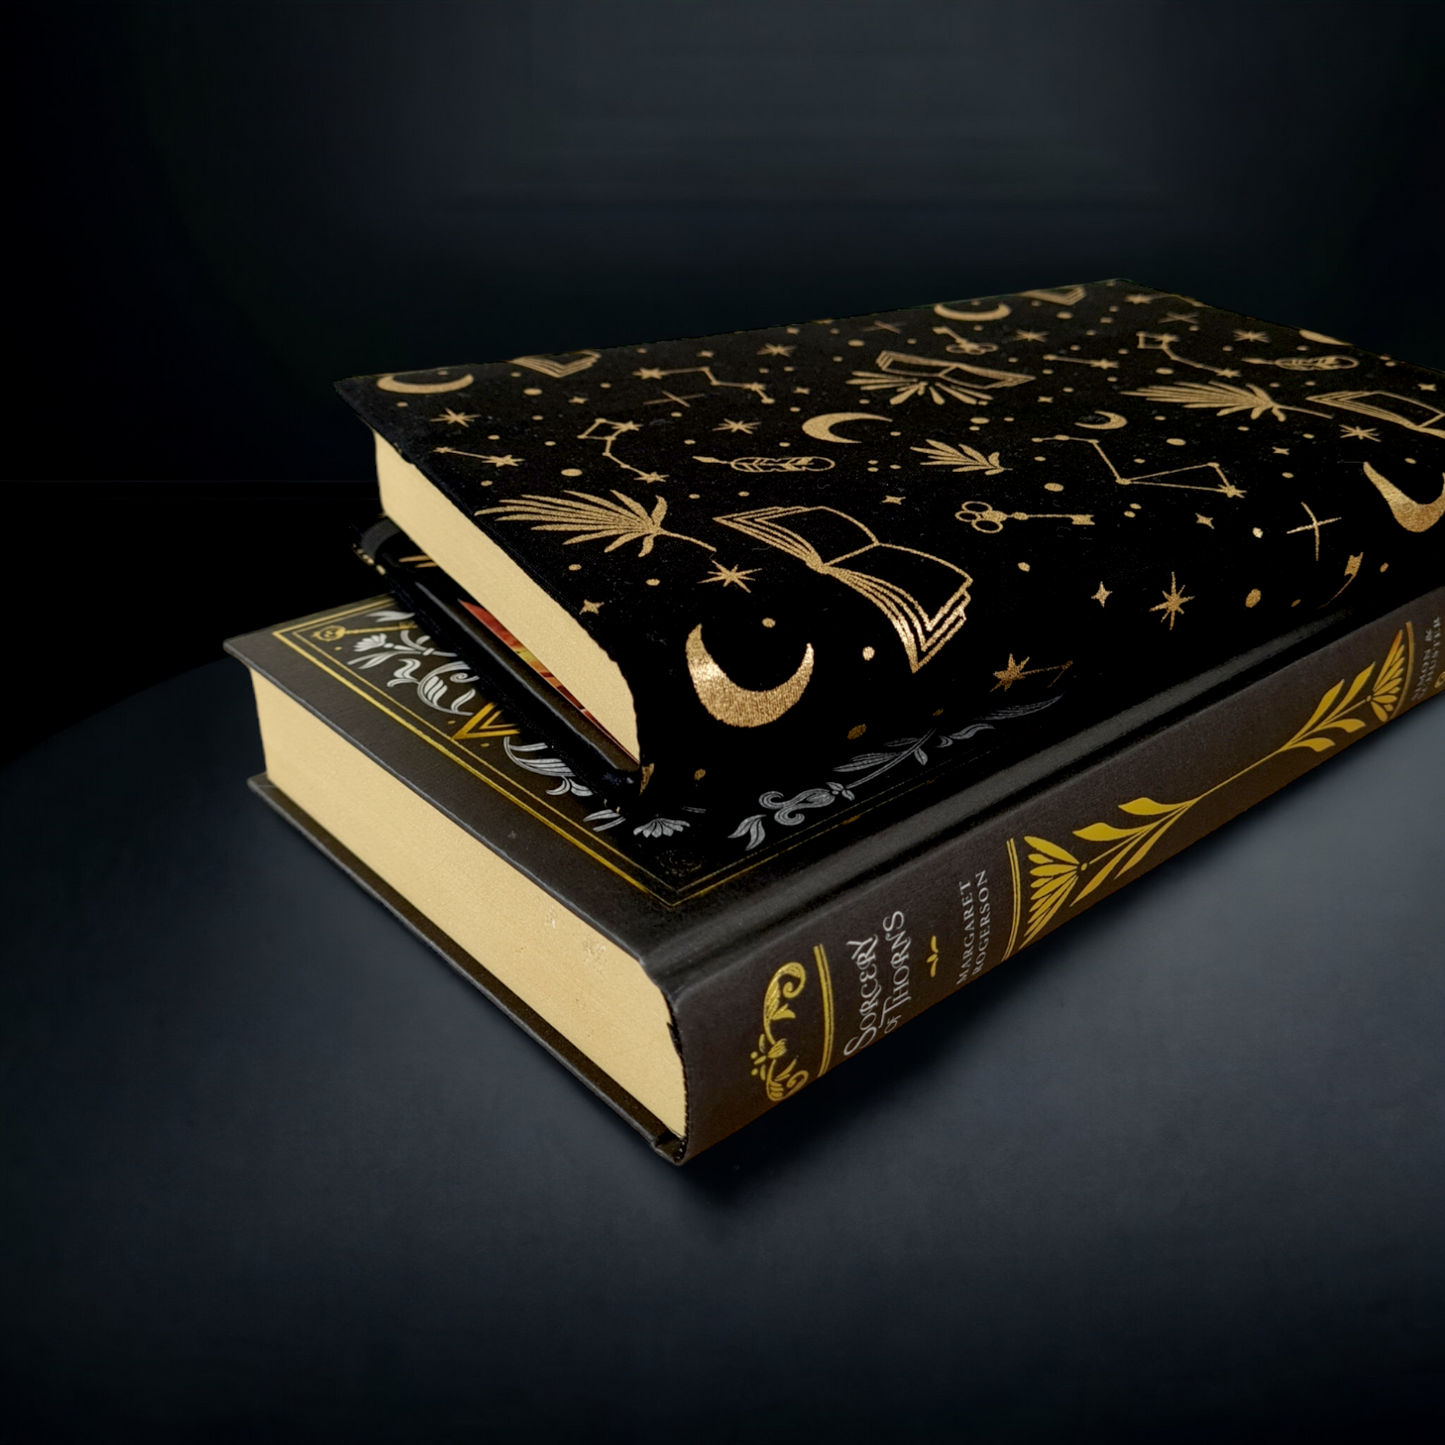 black and gold celestial reading fabric dust jacket book cover